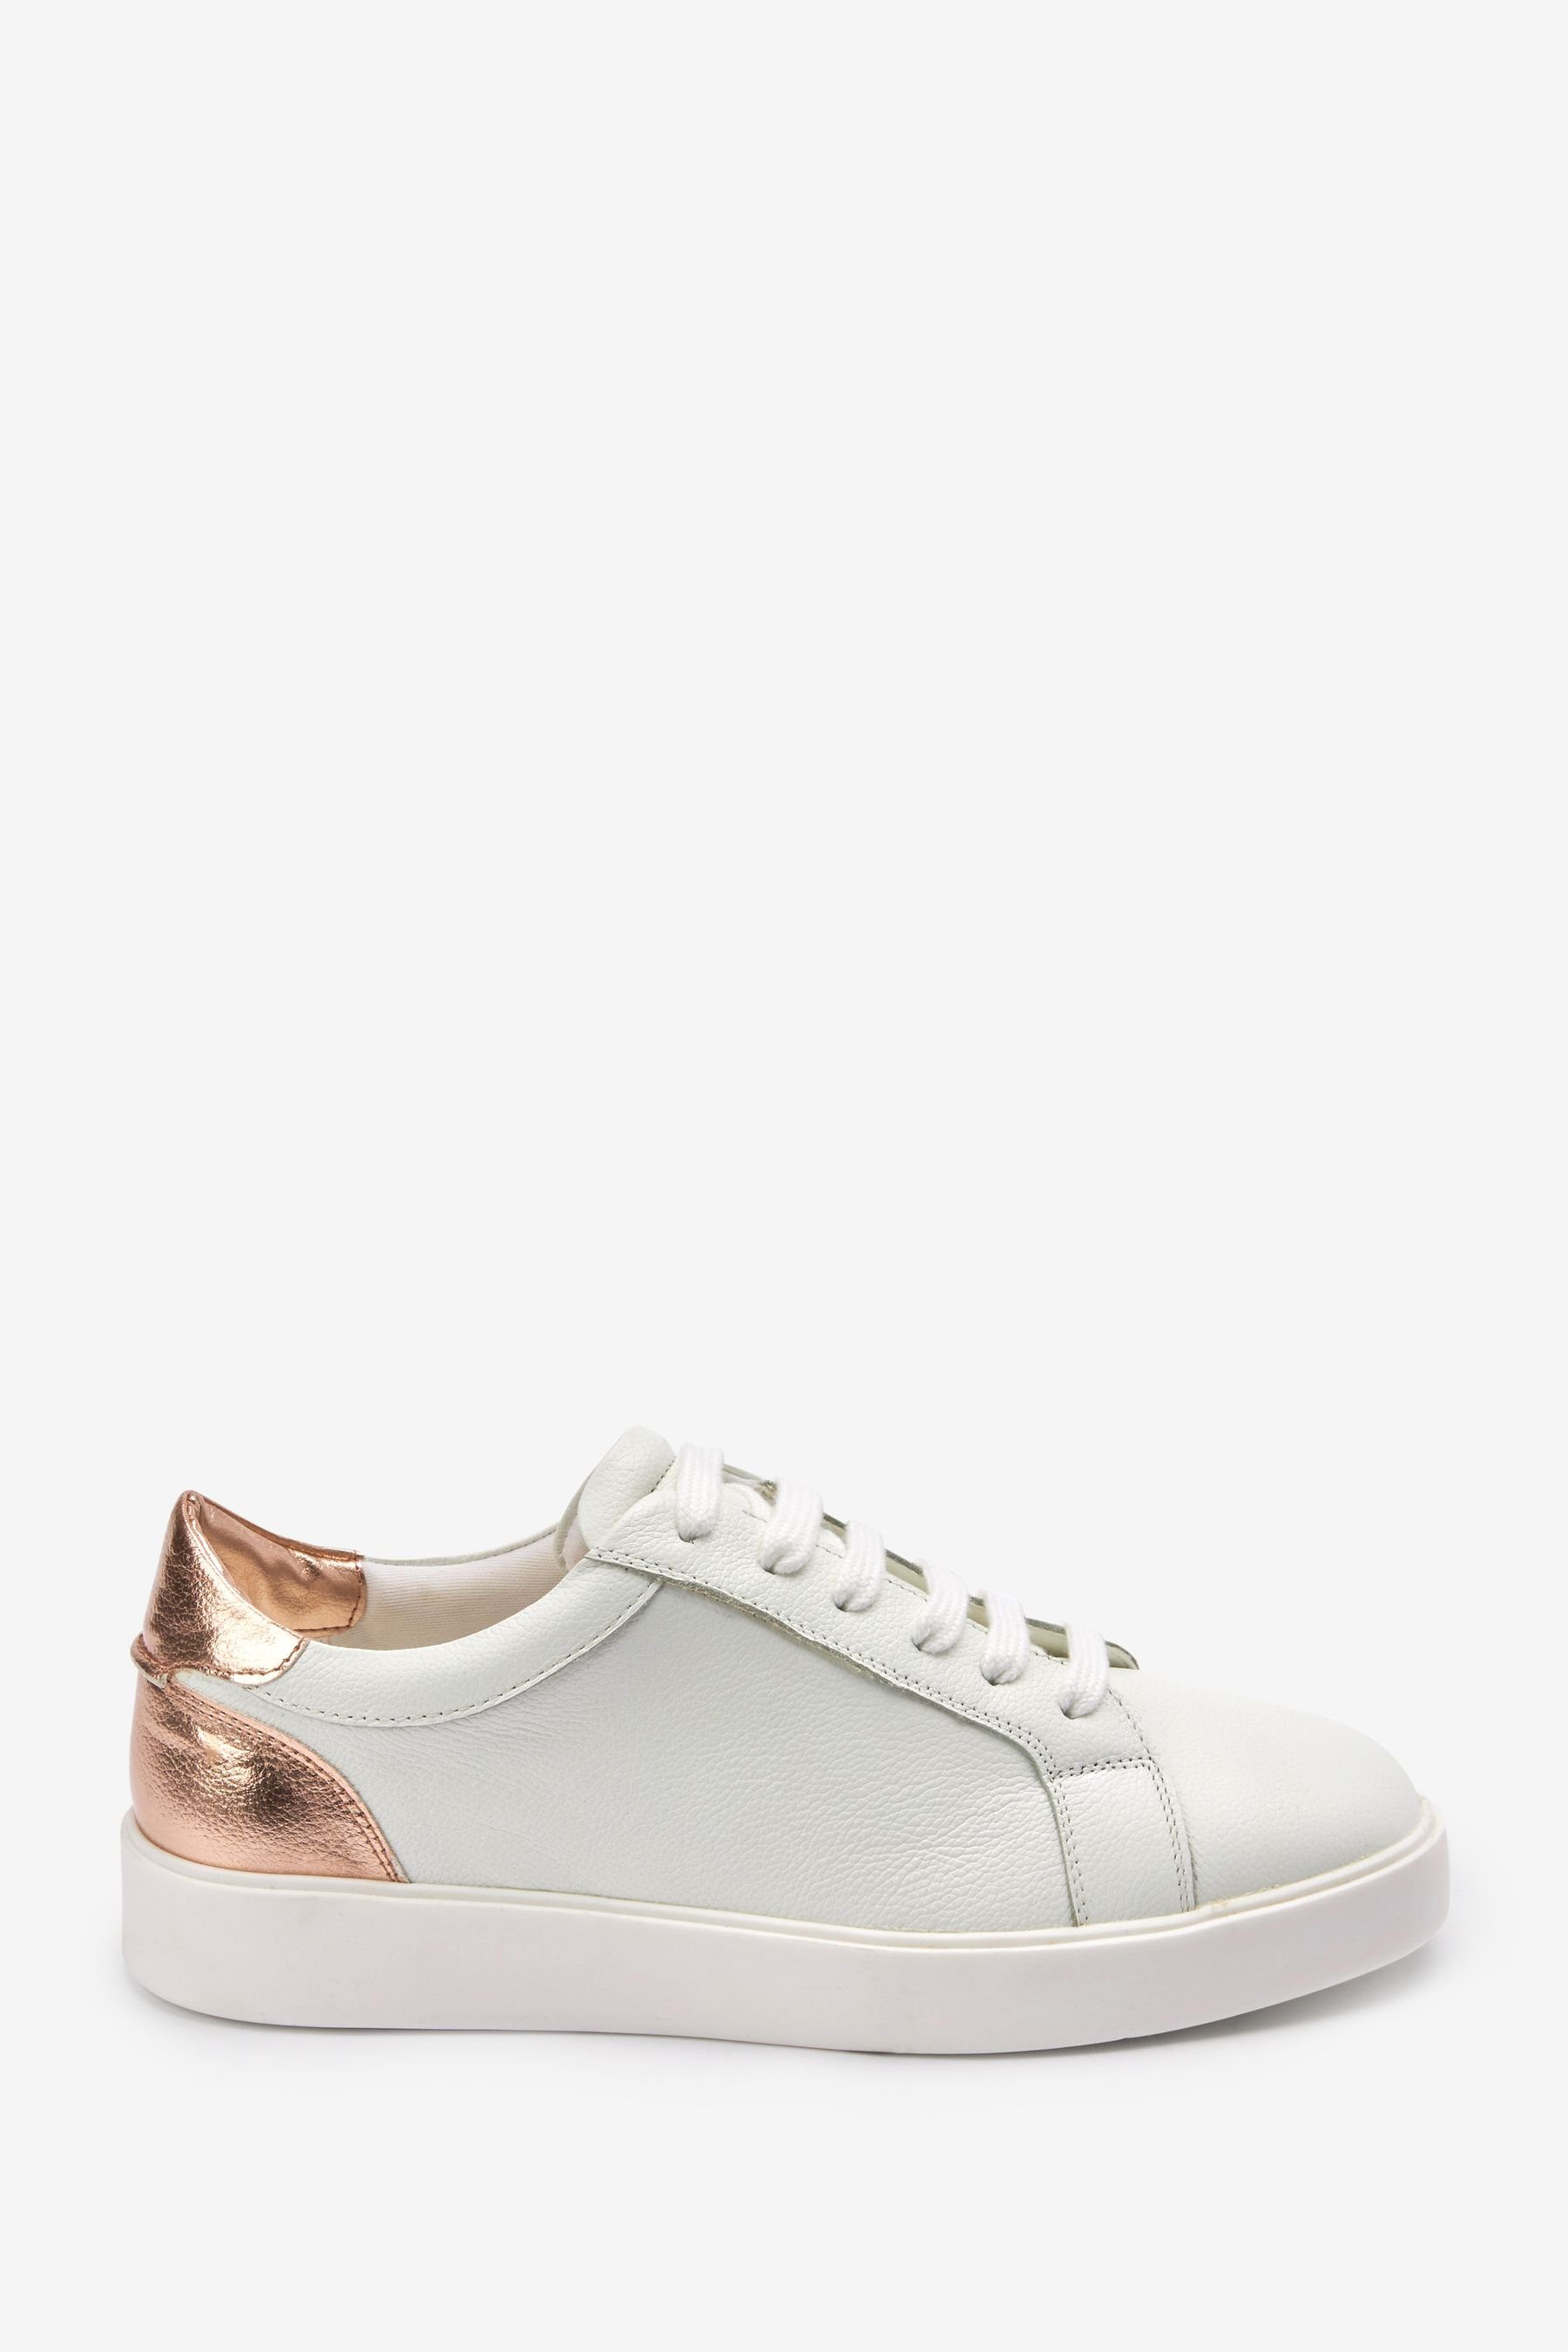 Next Signature Ledersneaker mit Schnürung Sneaker (1-tlg) White with Rose Gold